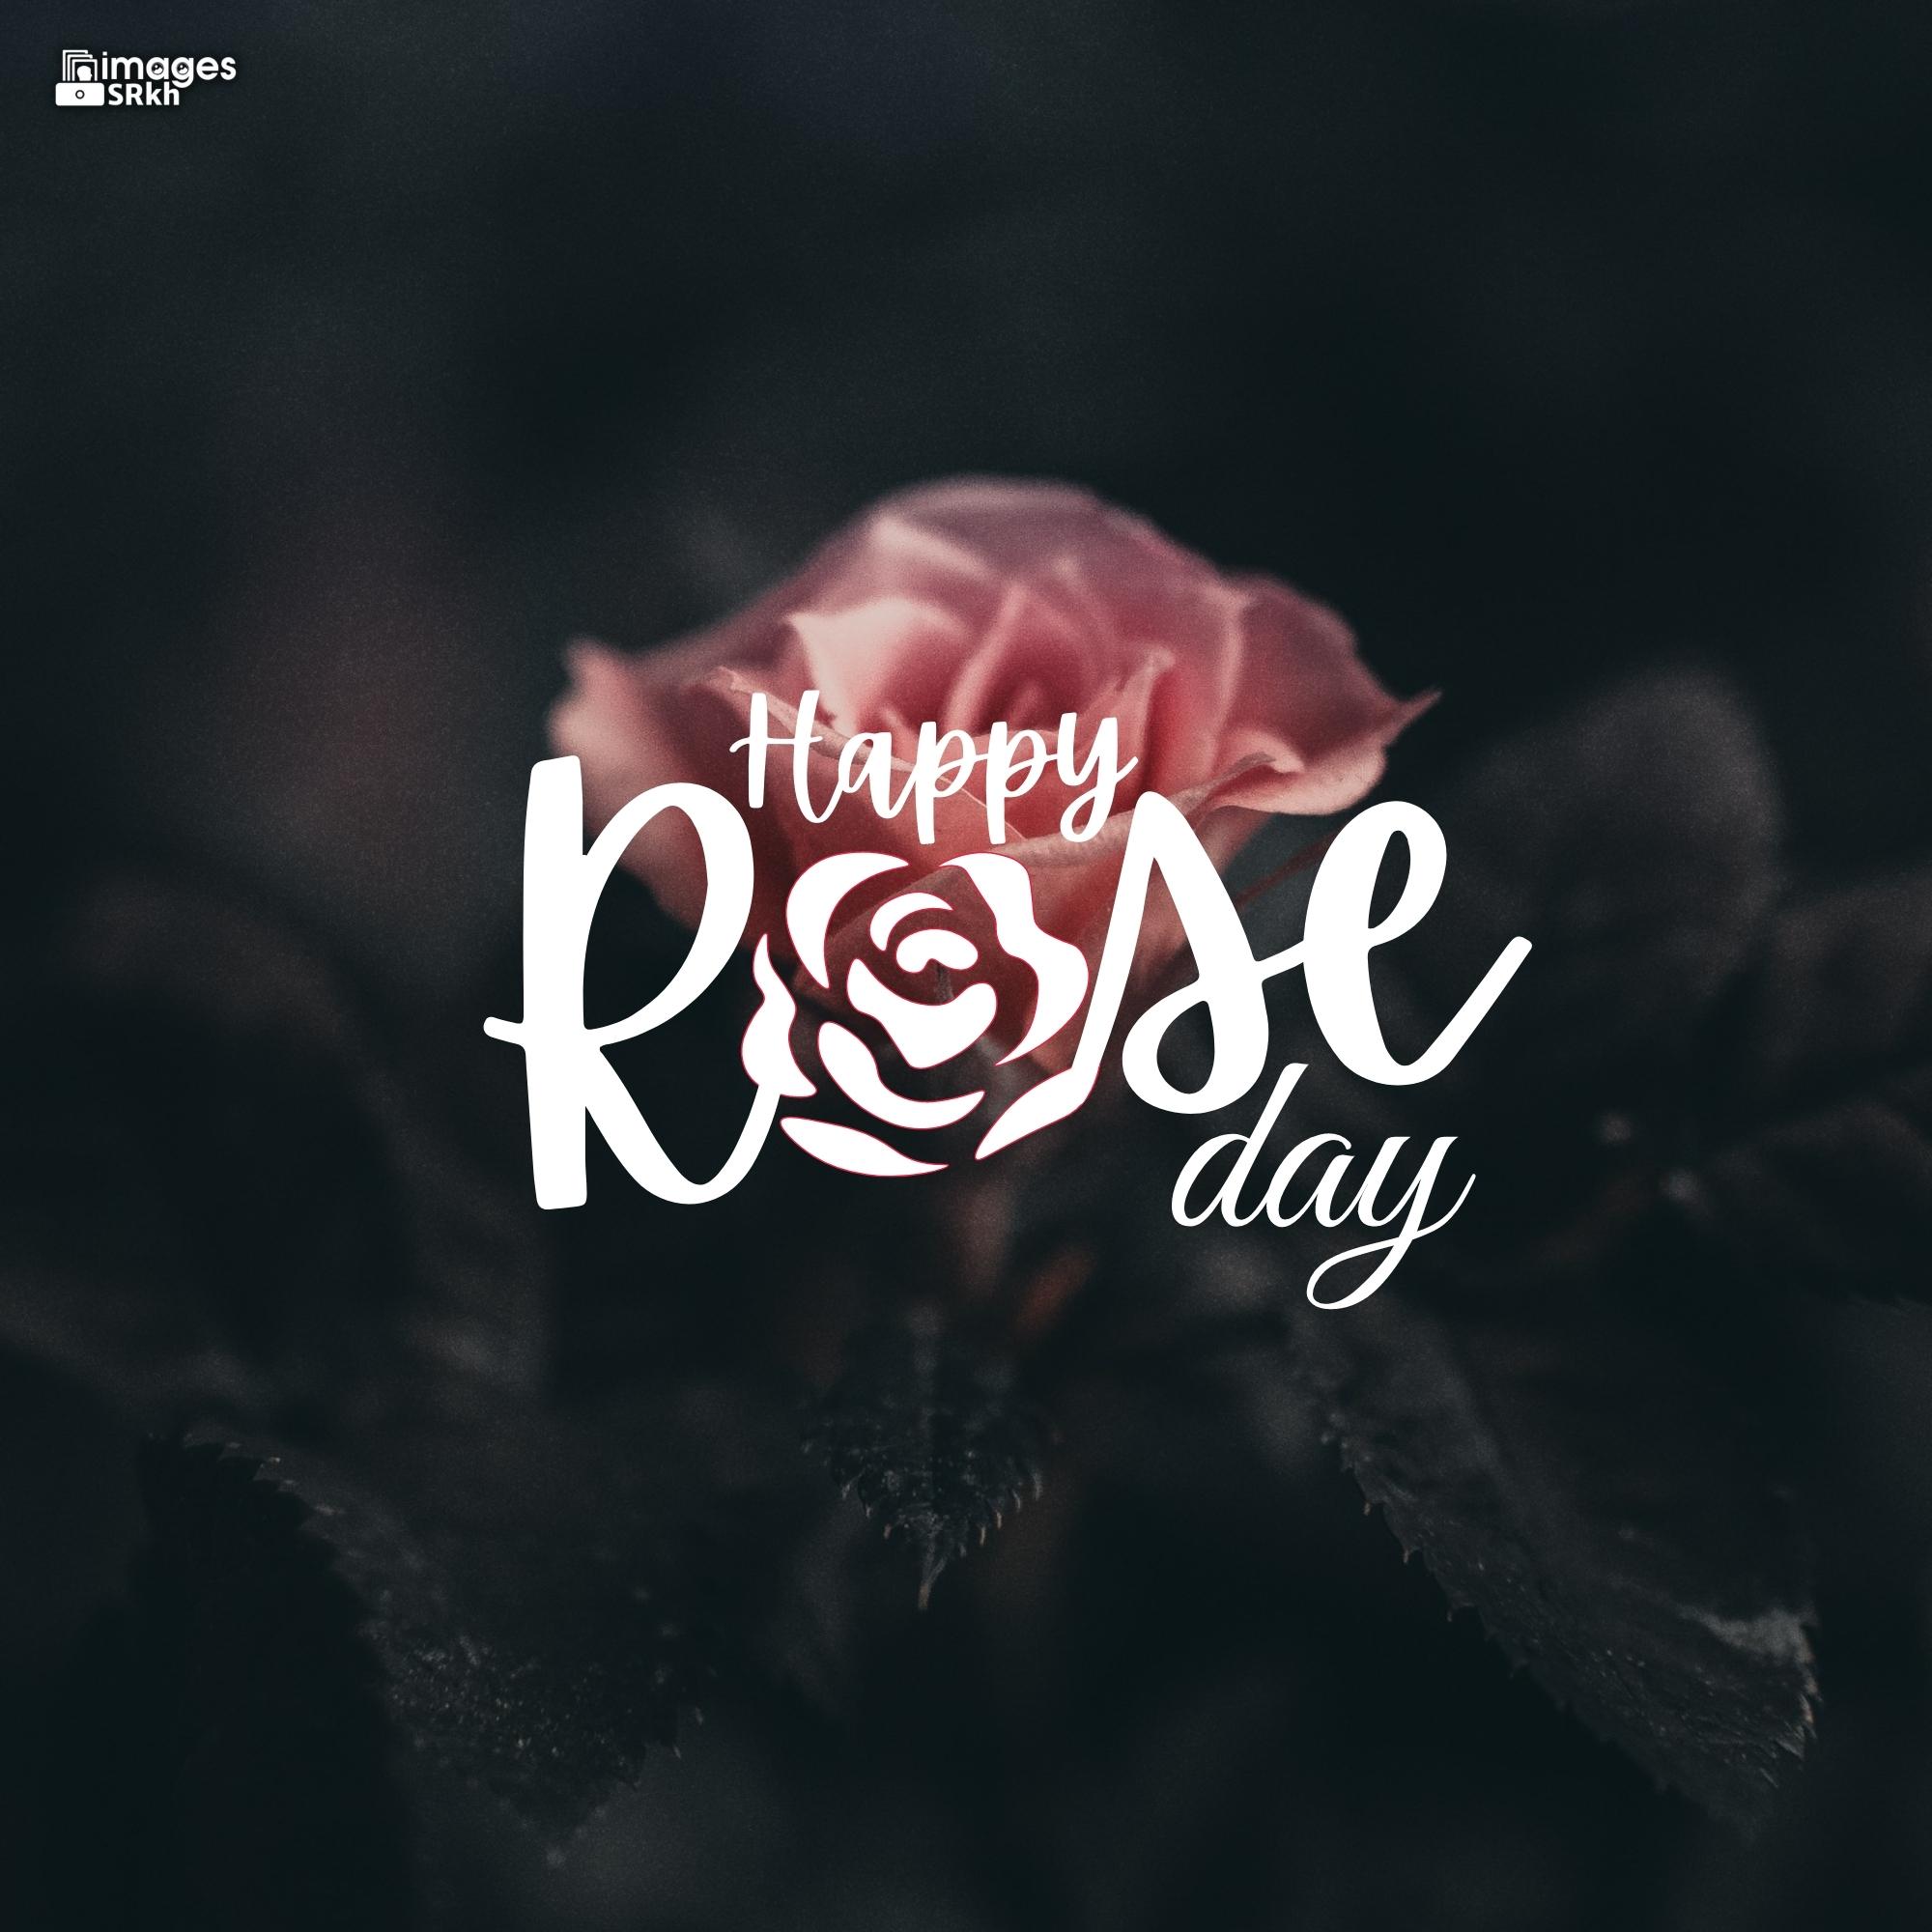 Happy Rose Day Image Hd Download (29)